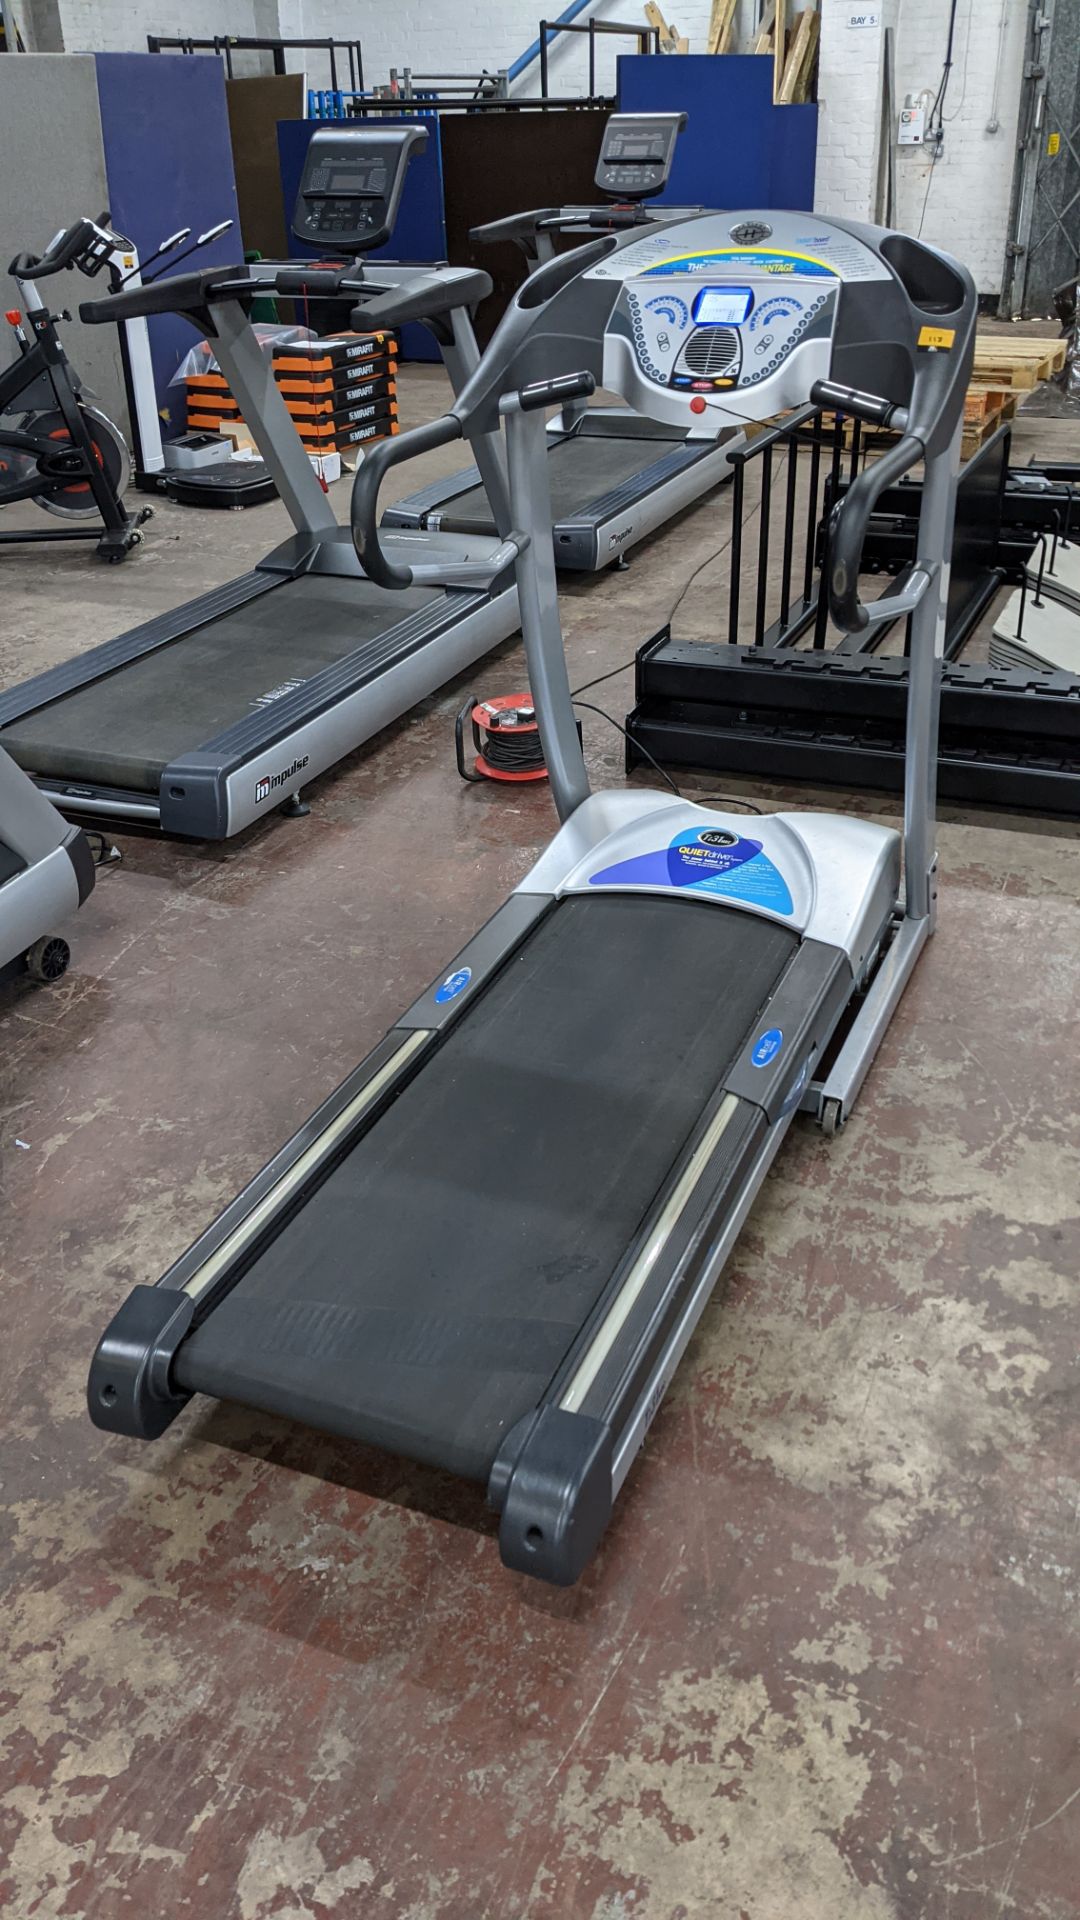 Horizon Fitness Ti31 HRC Treadmill - folds up for easy storage - Image 2 of 18